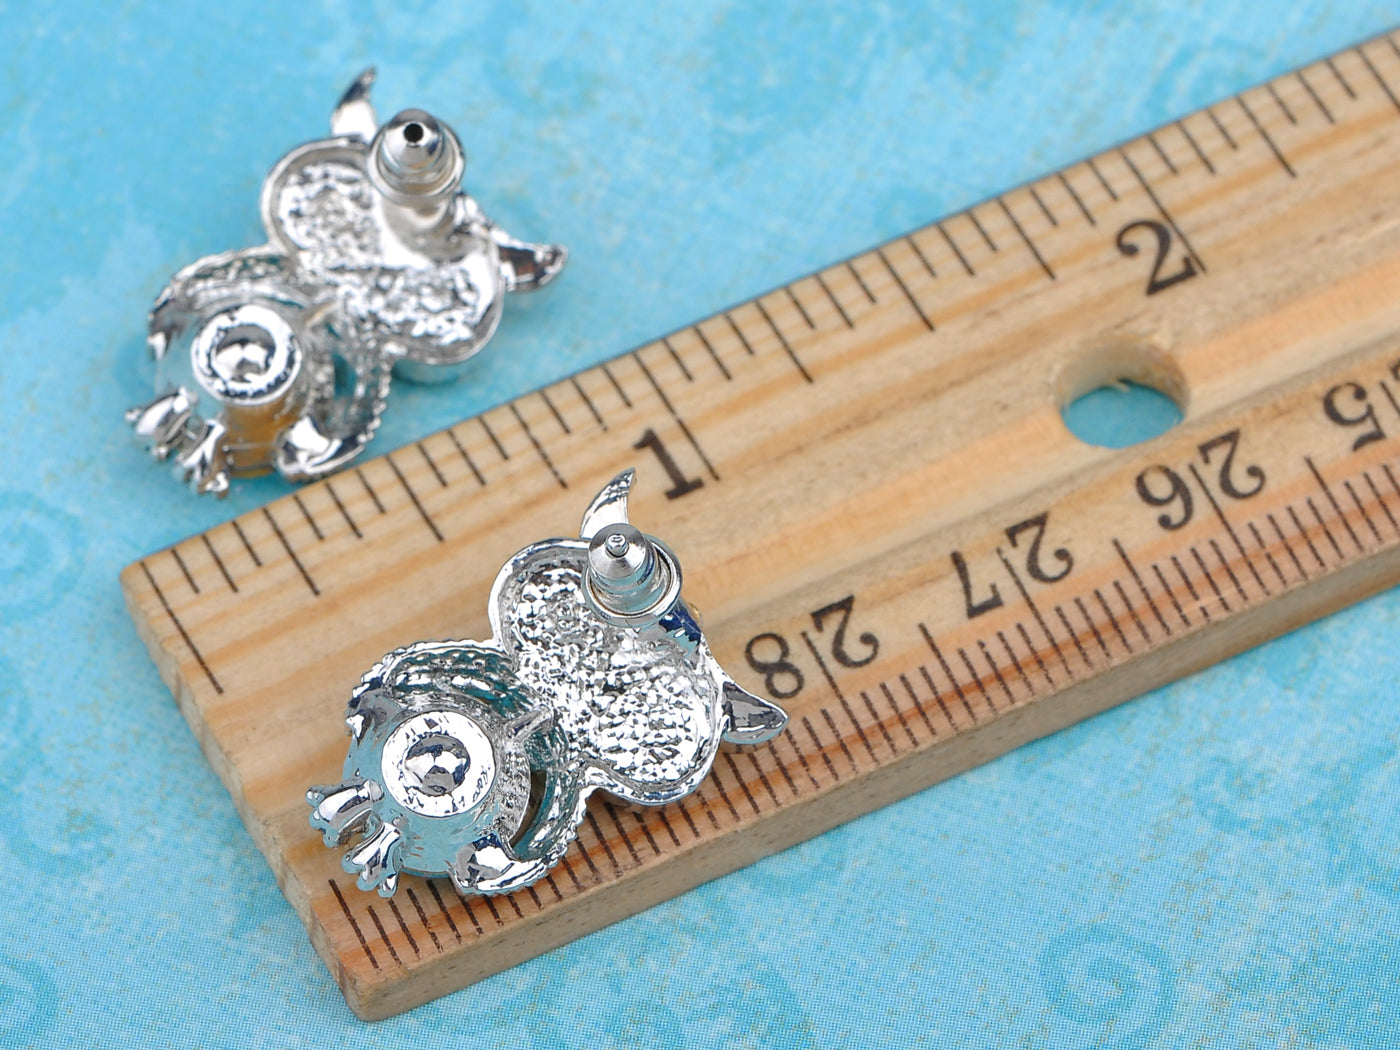 Turquoise Blue Colored Owl Bird Stud Earrings